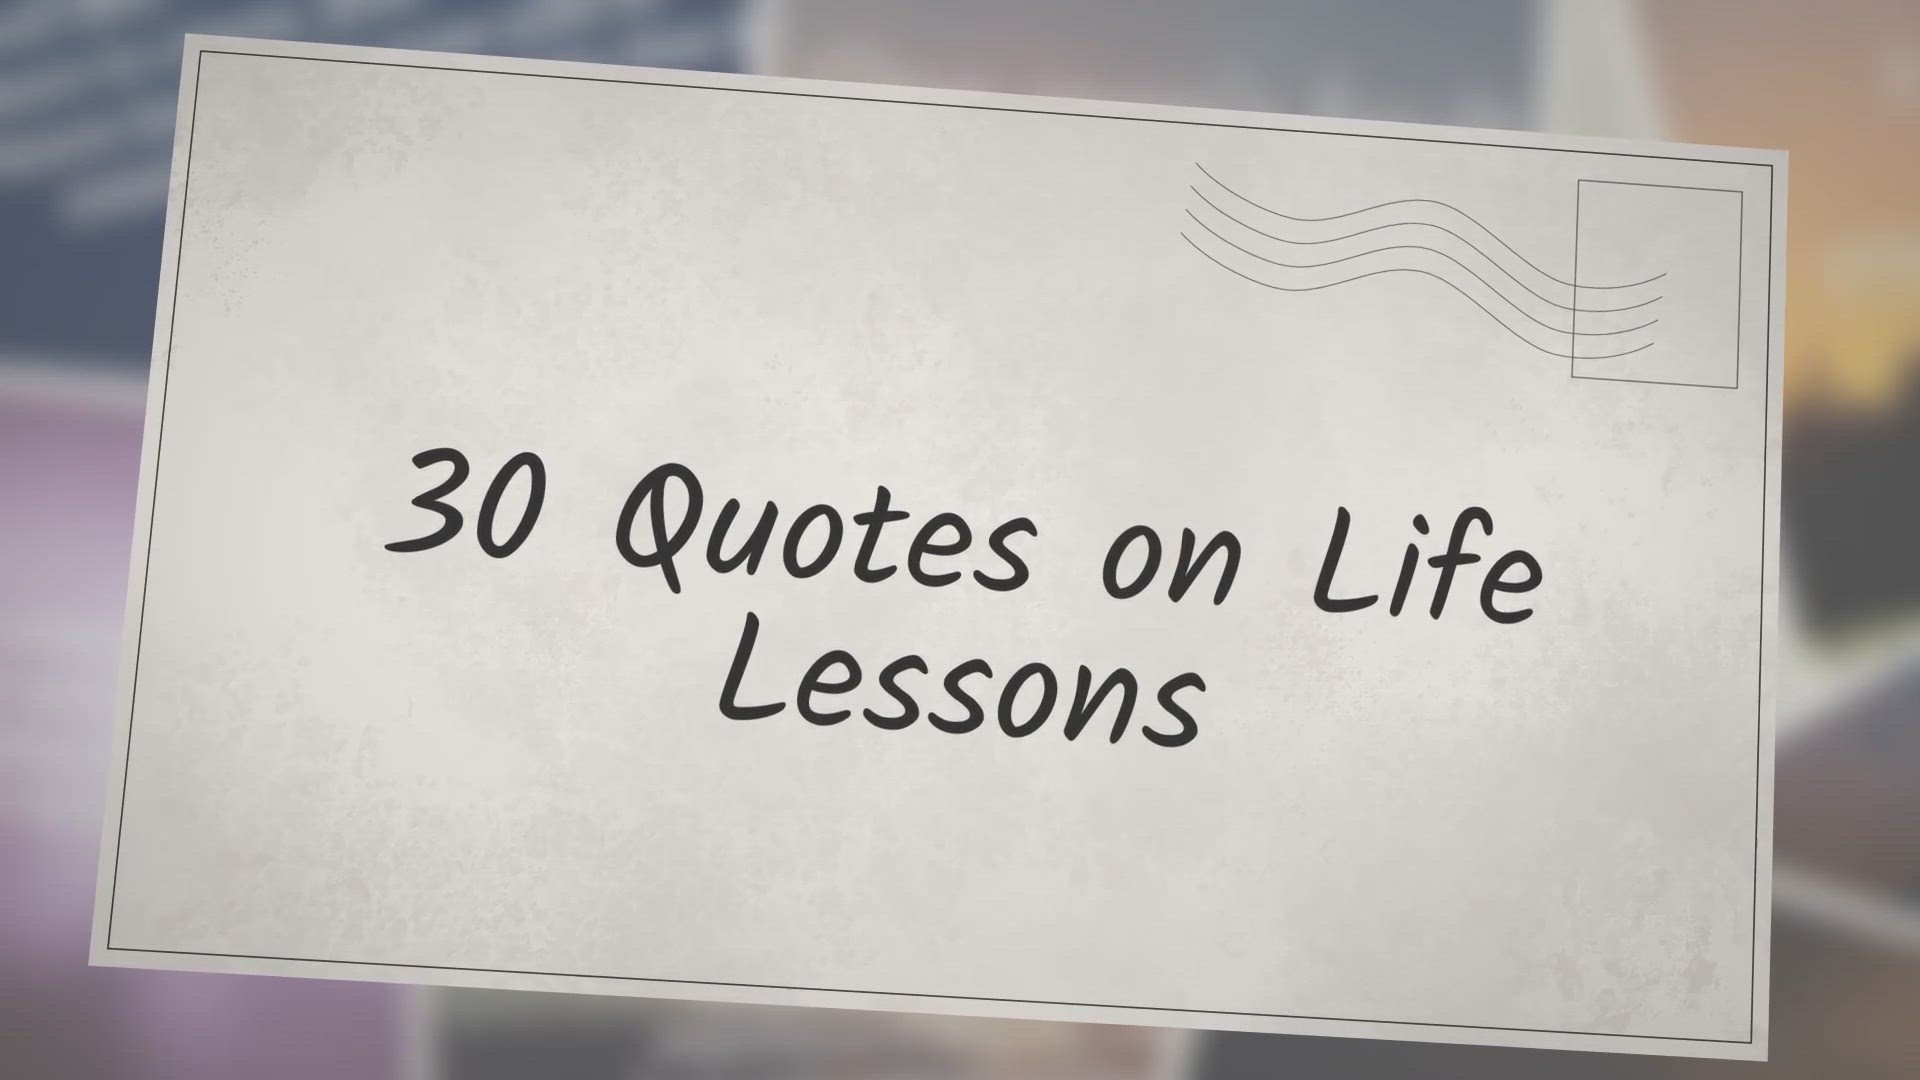 proverb about life lessons